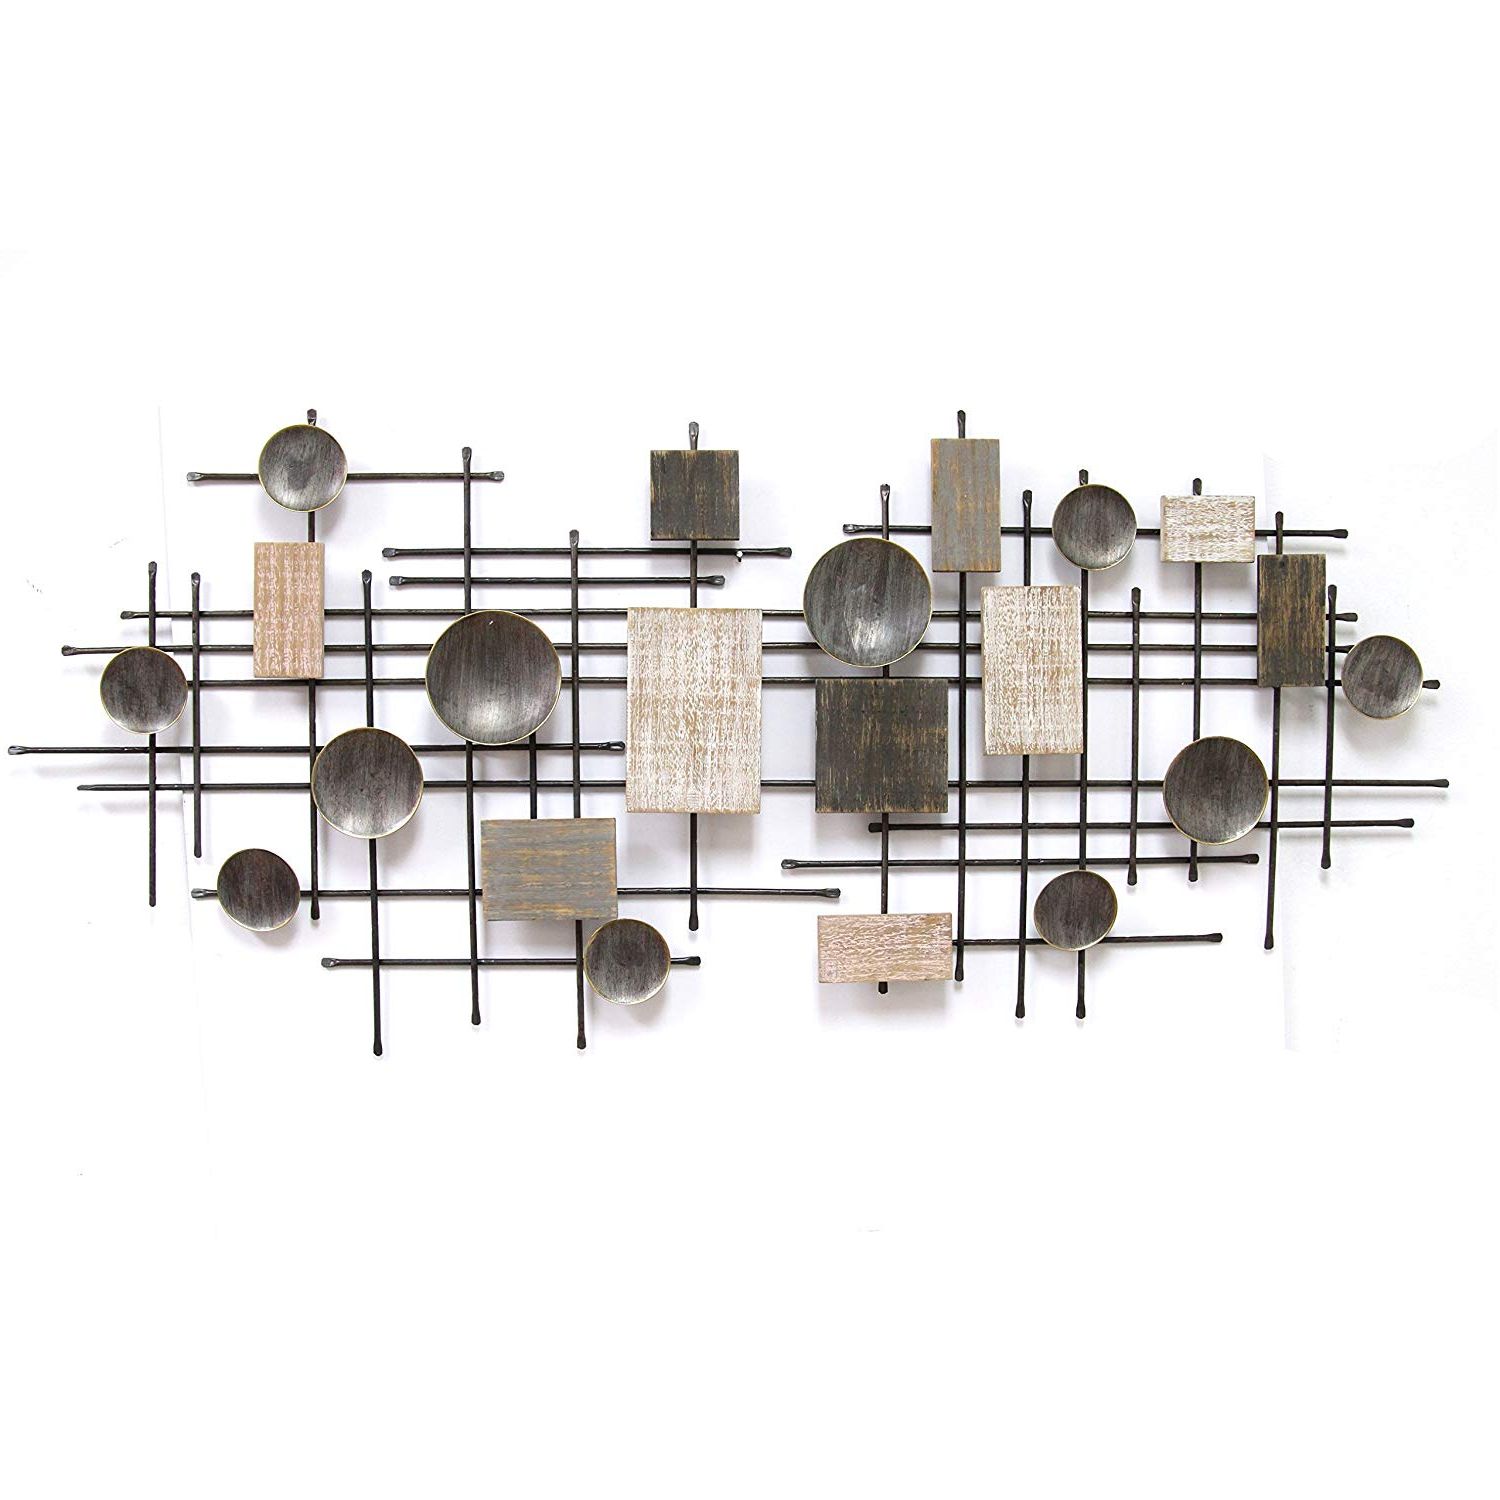 Amazon: Stratton Home Decor Large Modern Industrial Wall Decor Inside Well Known Large Modern Industrial Wall Decor (View 2 of 20)